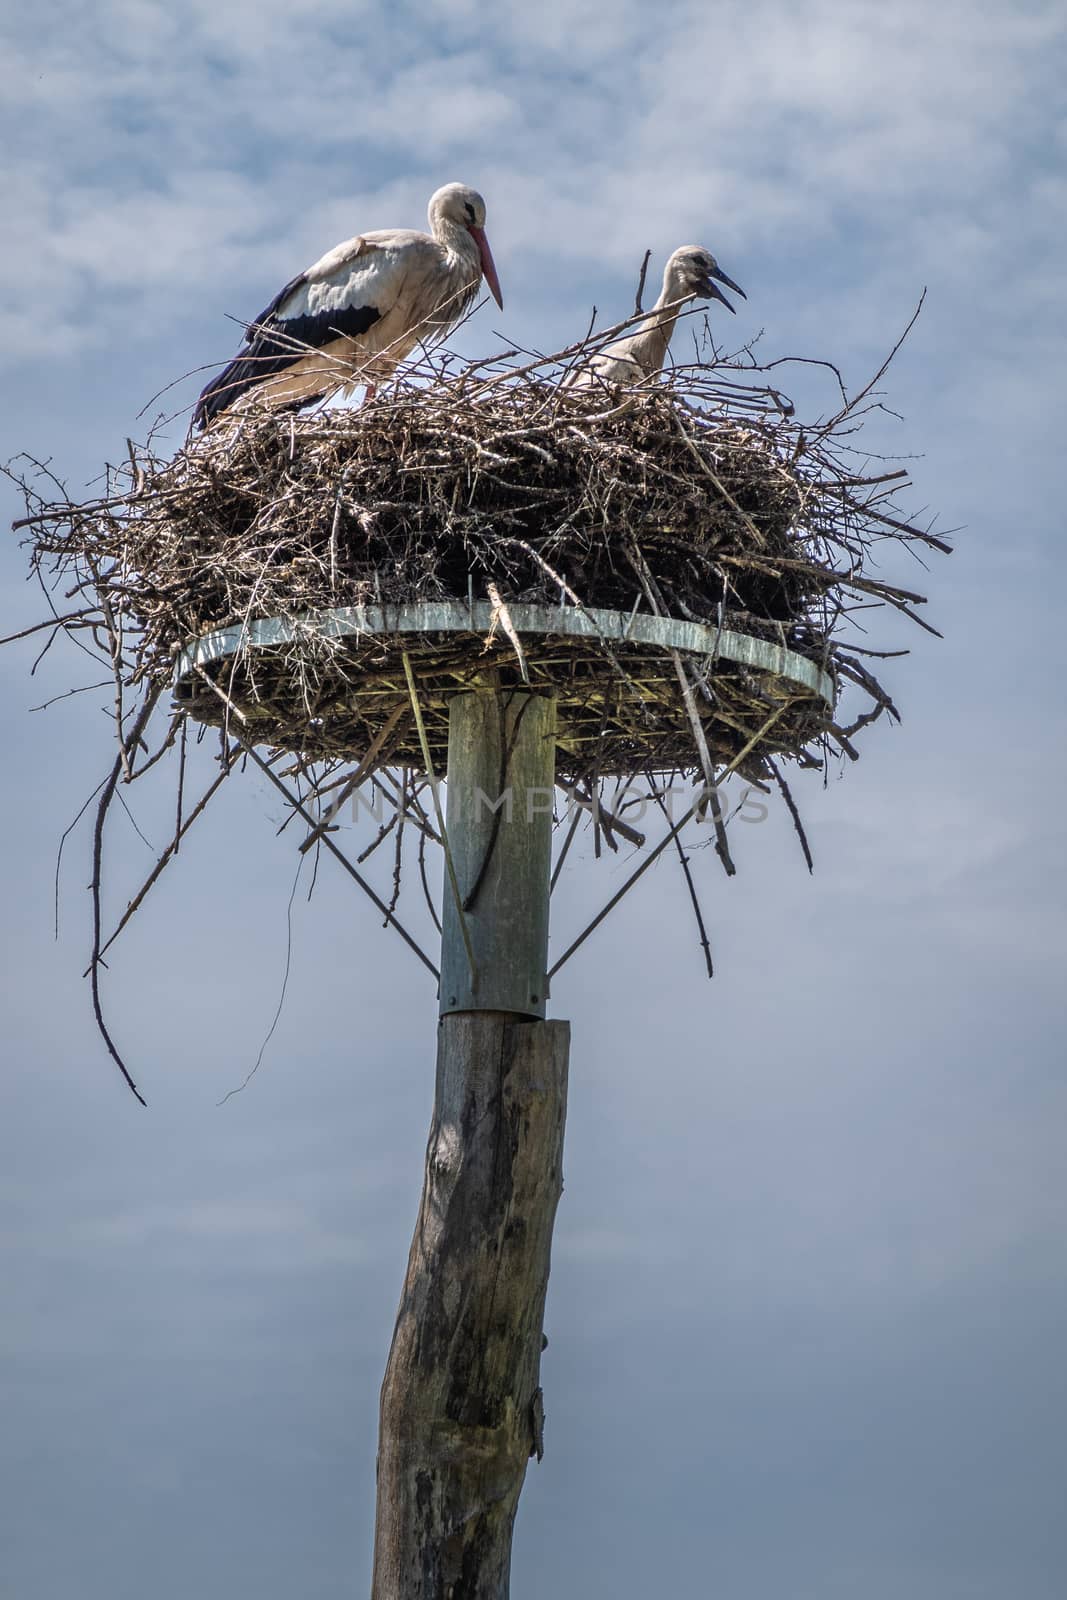 Adult and one chick stork in nest in Zwin Bird Refuge, Knokke-He by Claudine